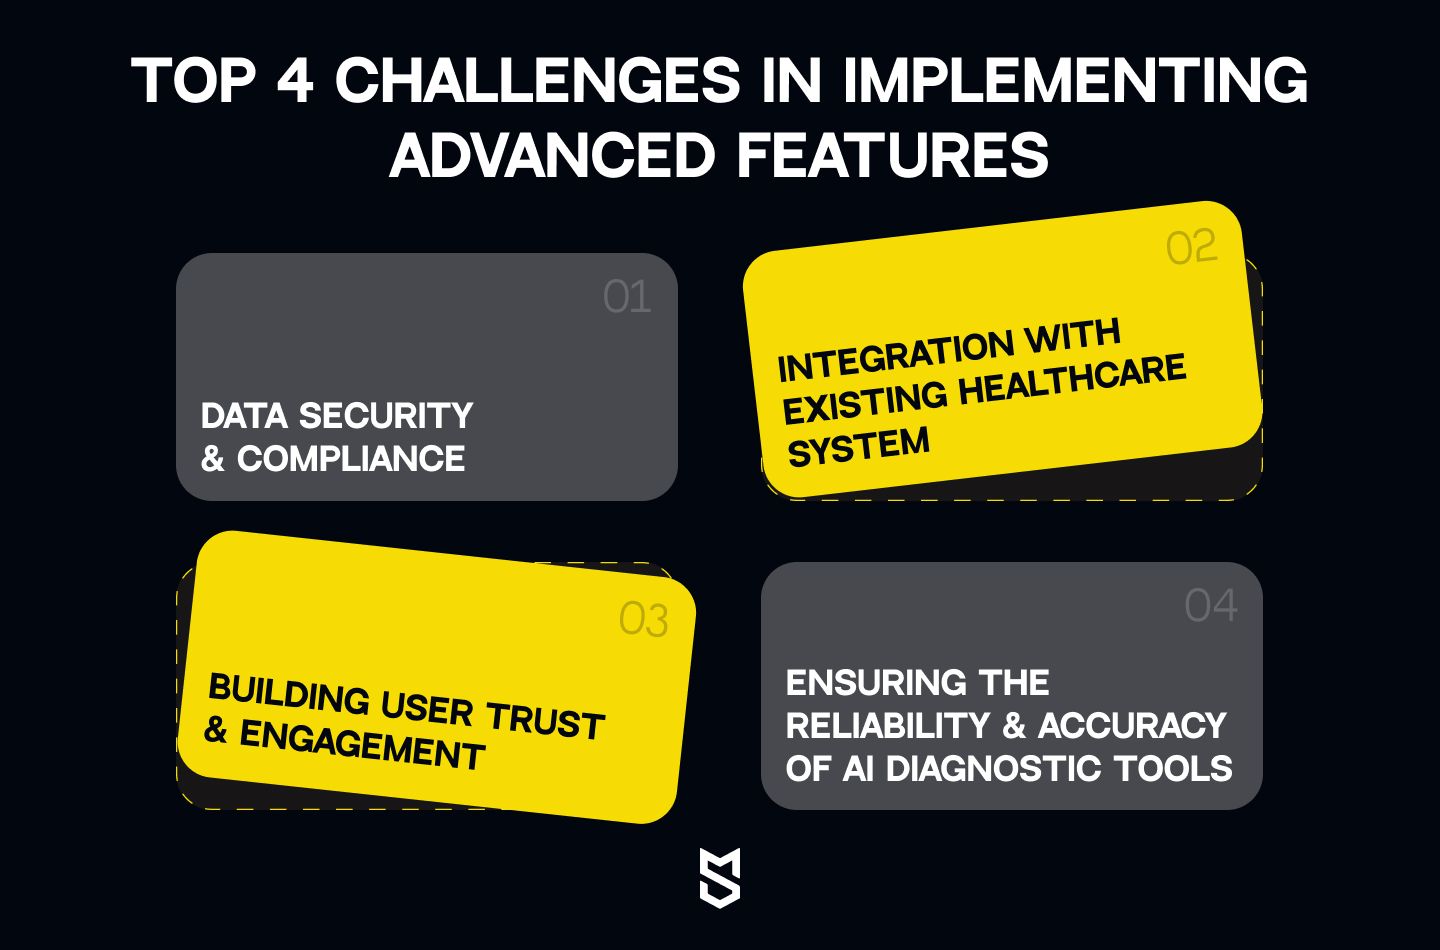 Top 4 challenges in implementing advanced features